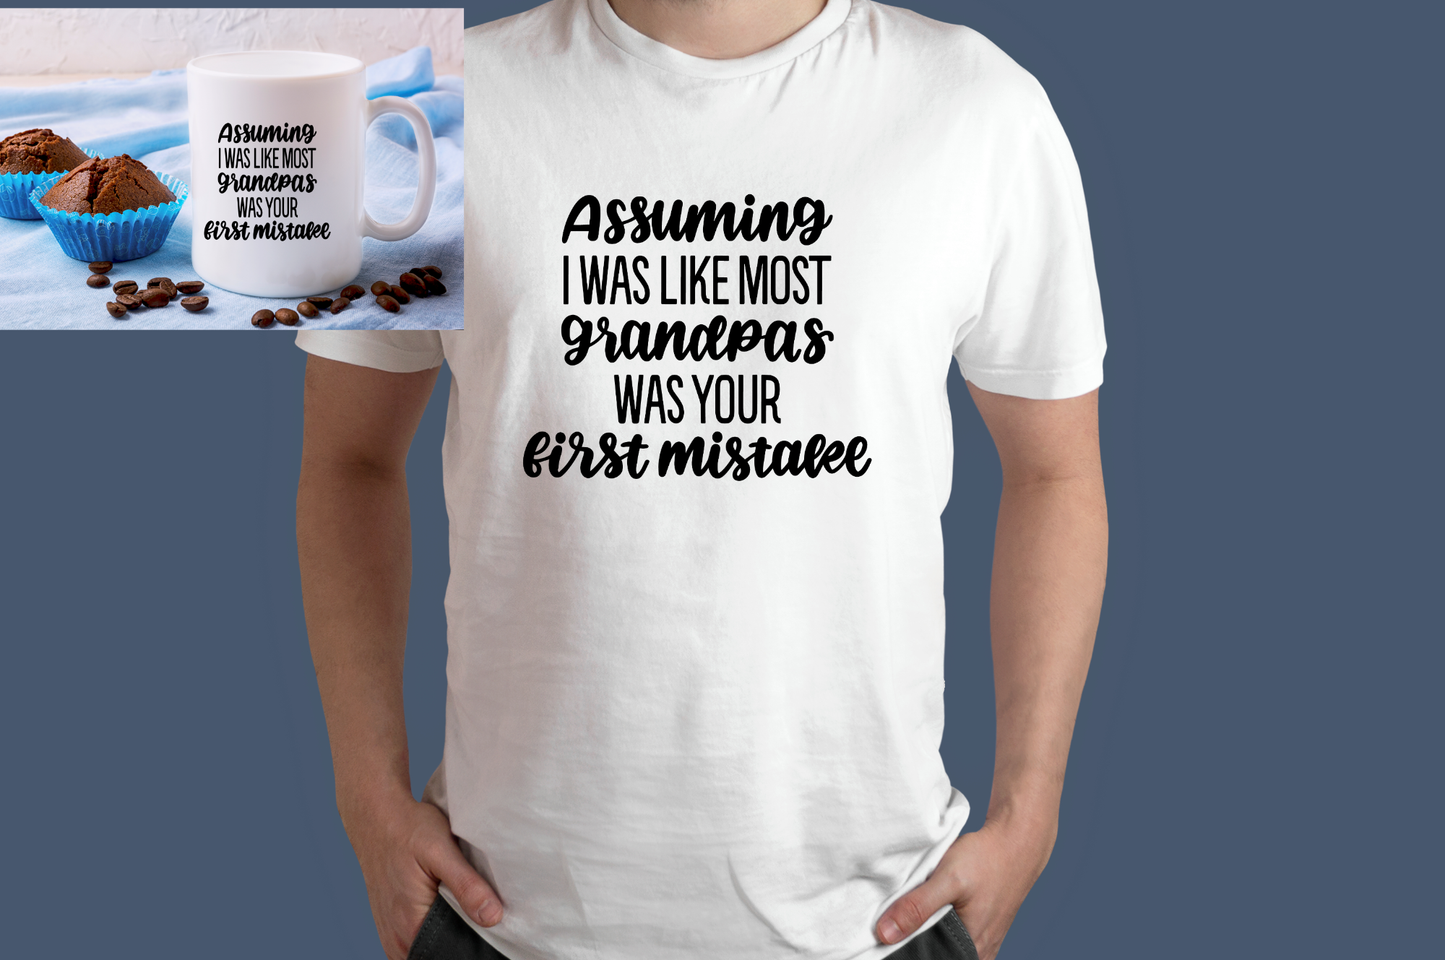 Assuming I Was Like Other Grandpas Was Your First Mistake T-Shirt and Mug Set